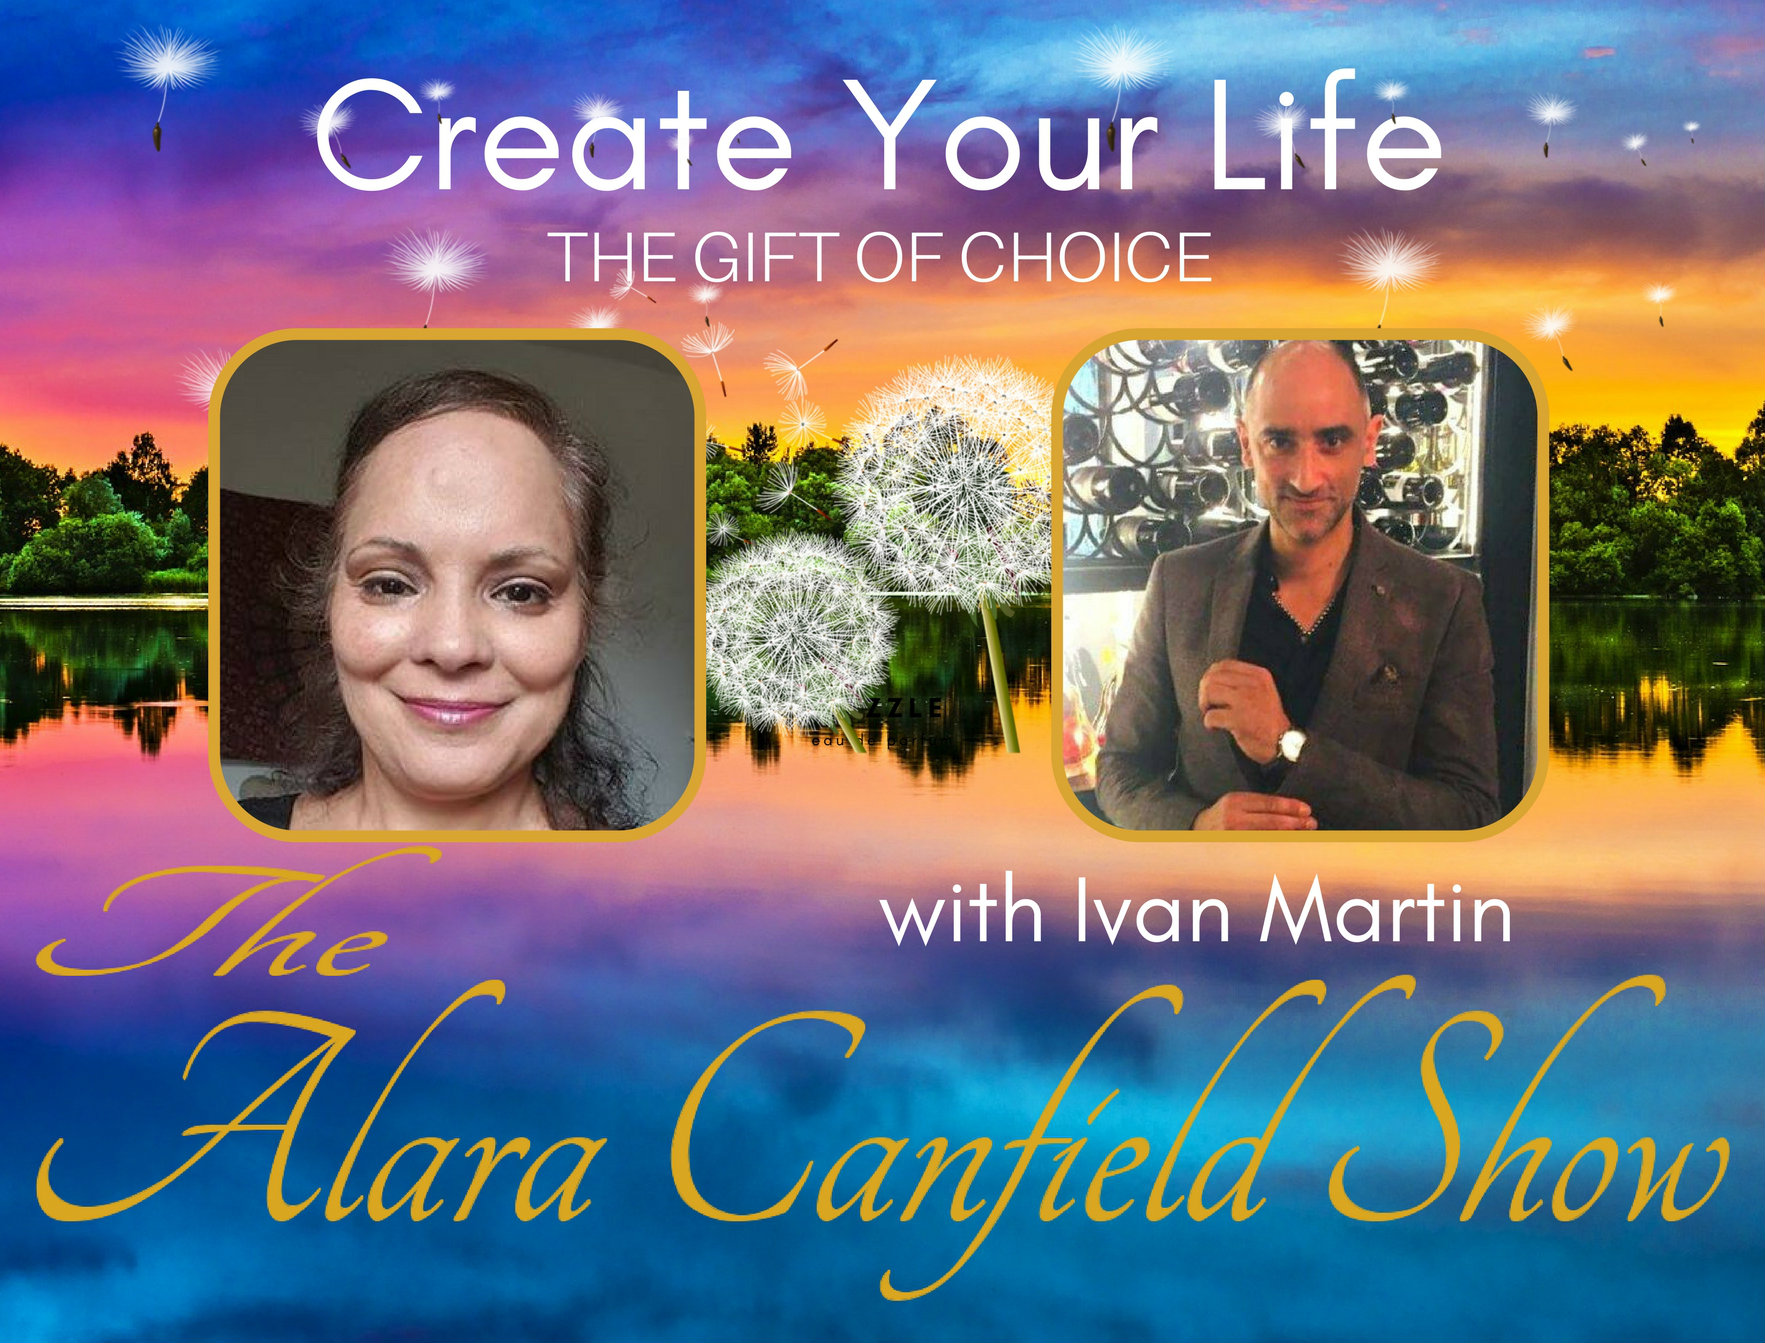 Create Your Life with Ivan Martin